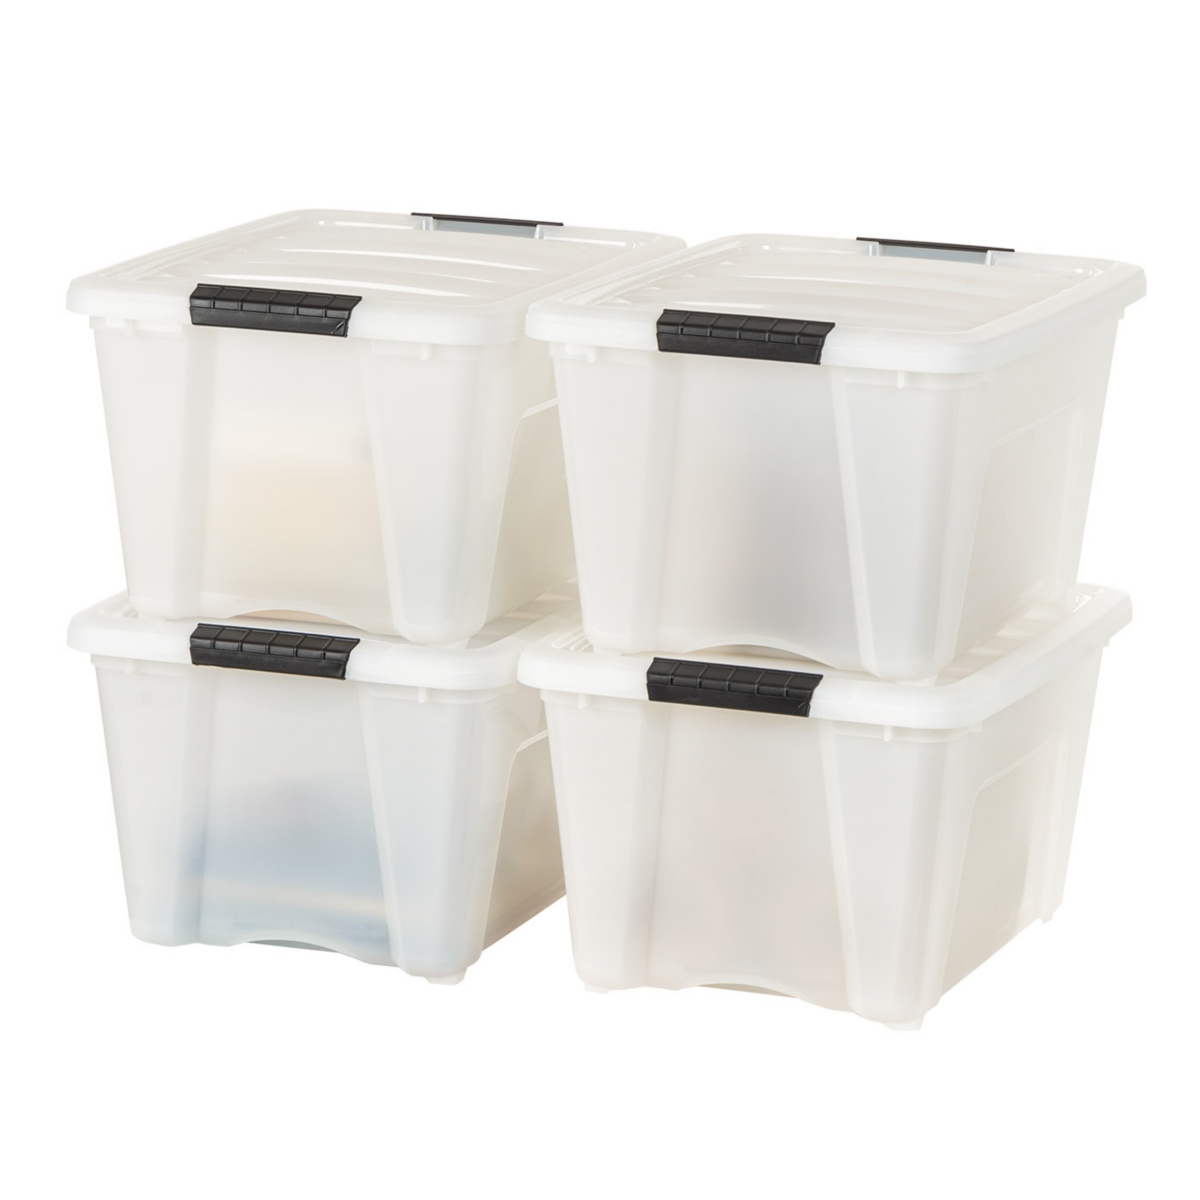 4 Pack 28qt Plastic Storage Bin with Lid and Secure Latching Buckles, Pearl - White